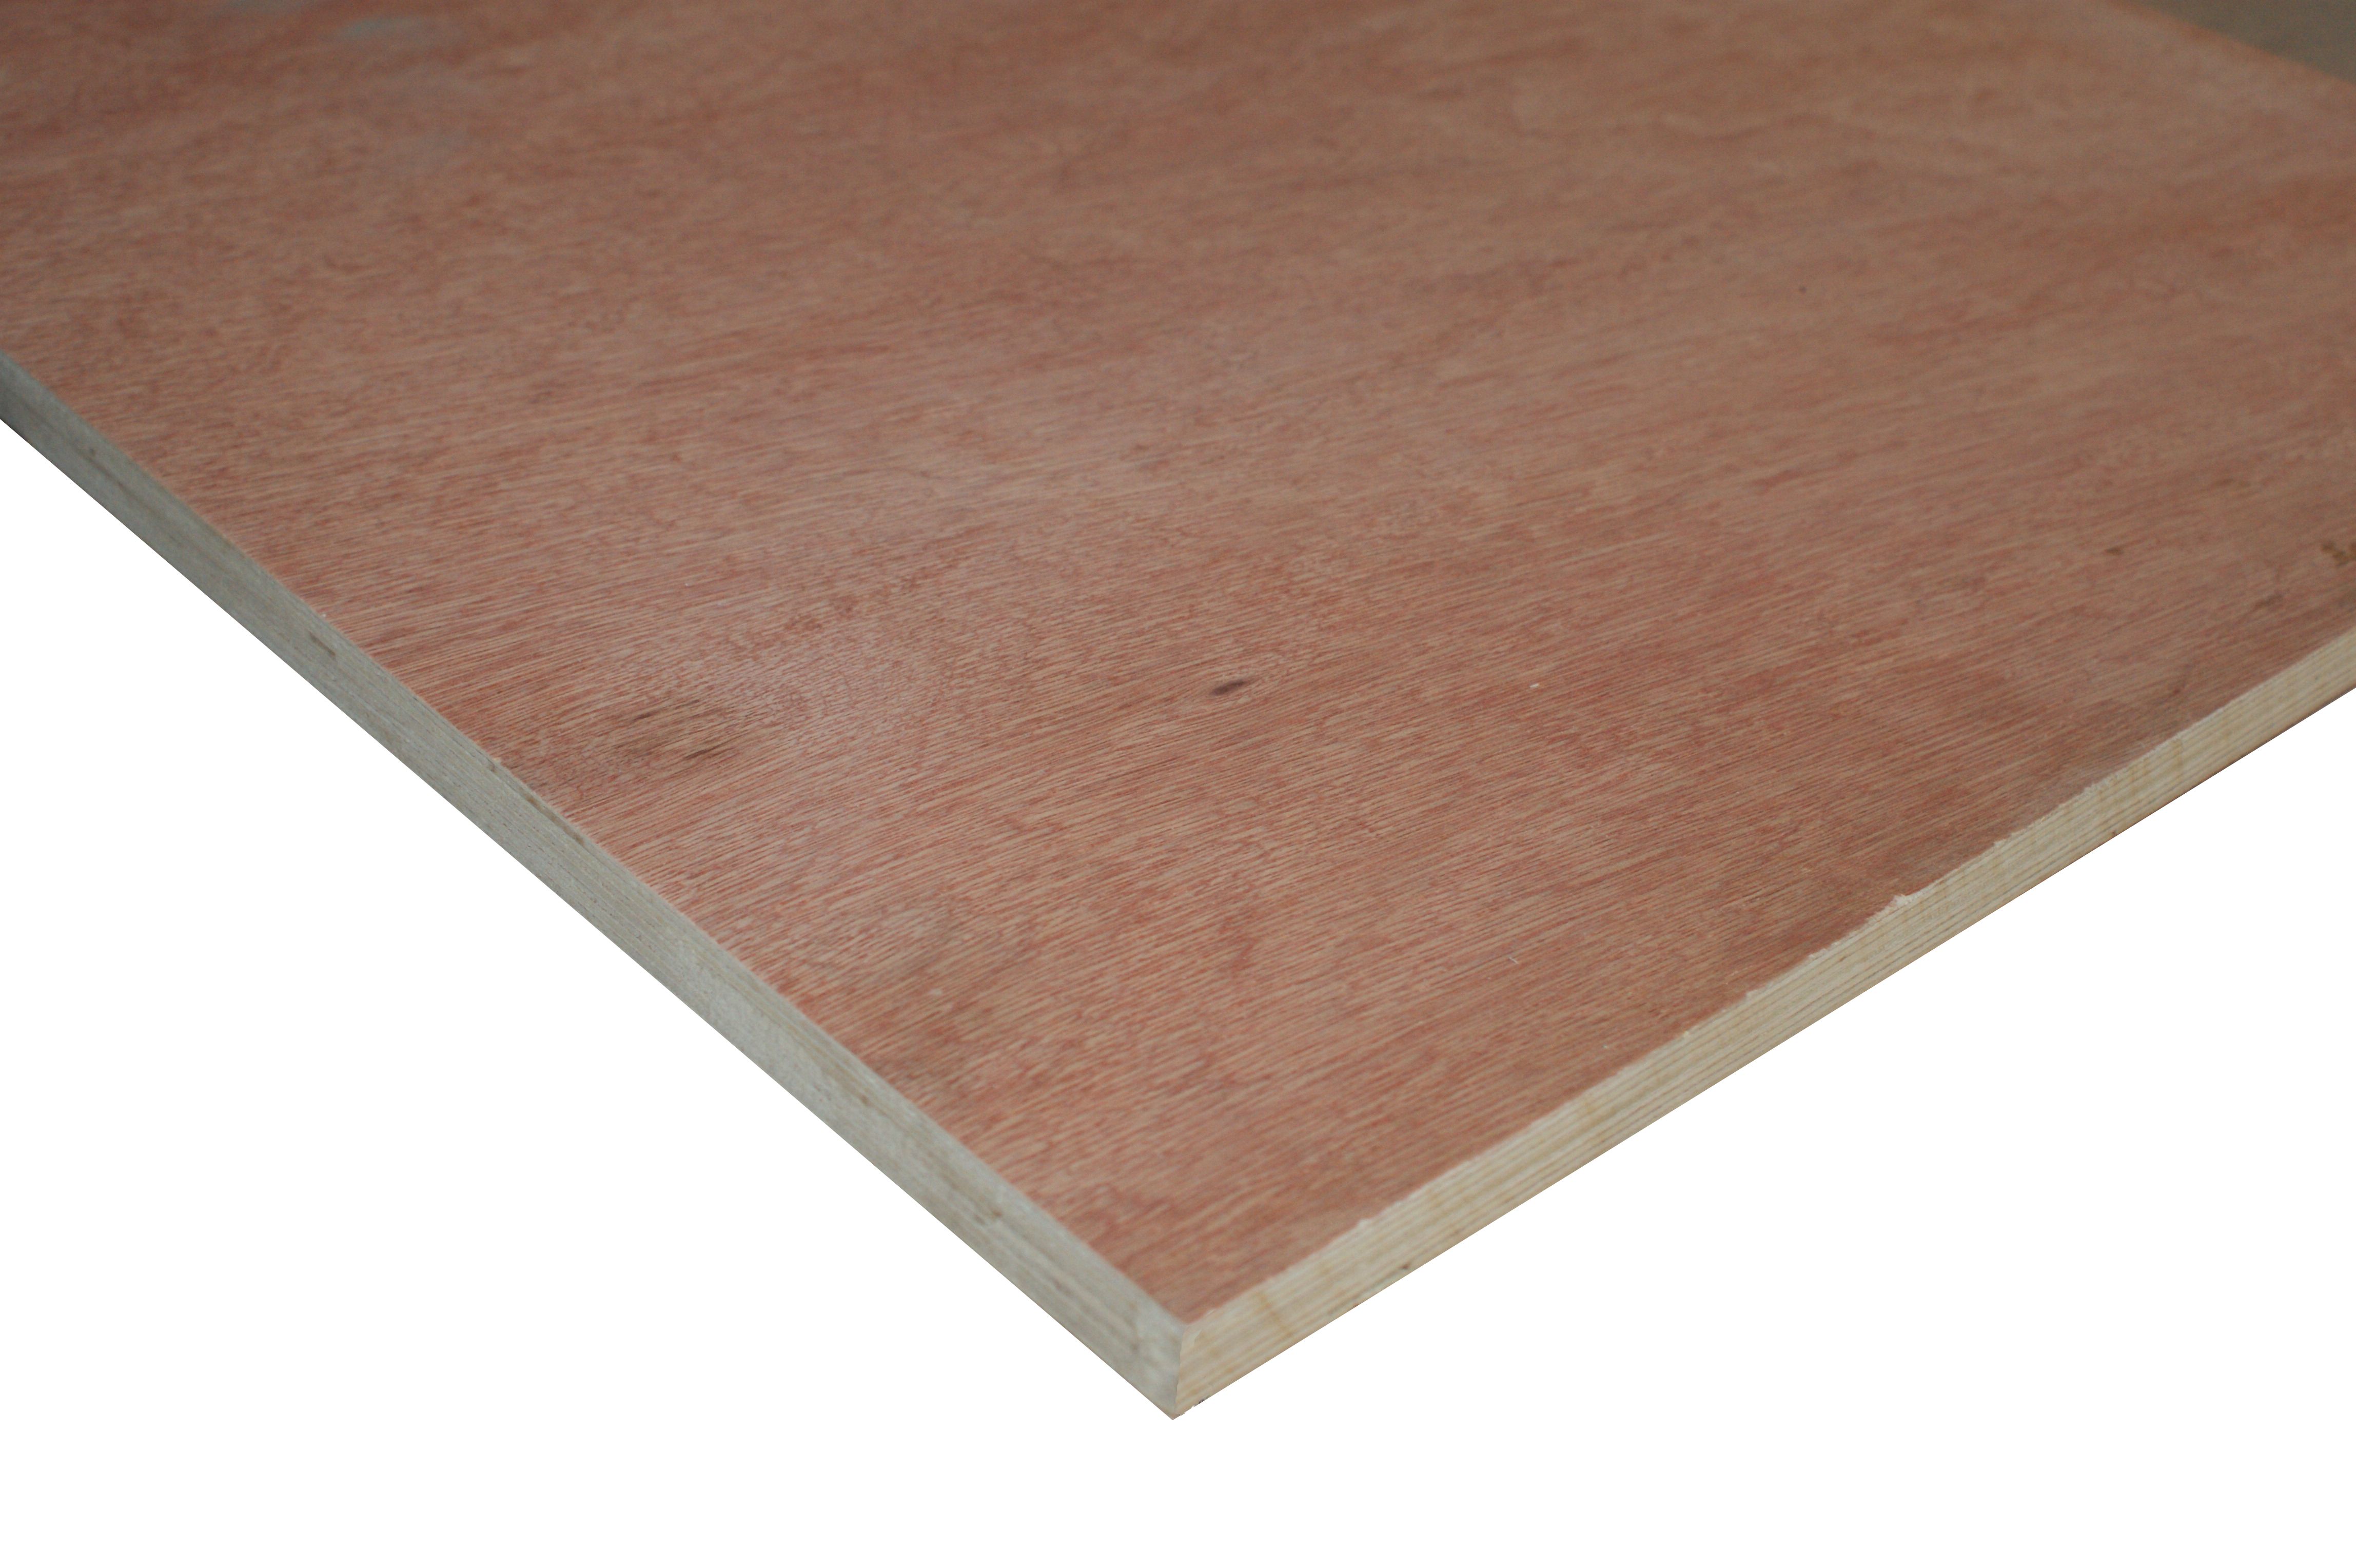 Image of Wickes Non-Structural Hardwood Plywood - 18 x 1220 x 2440mm